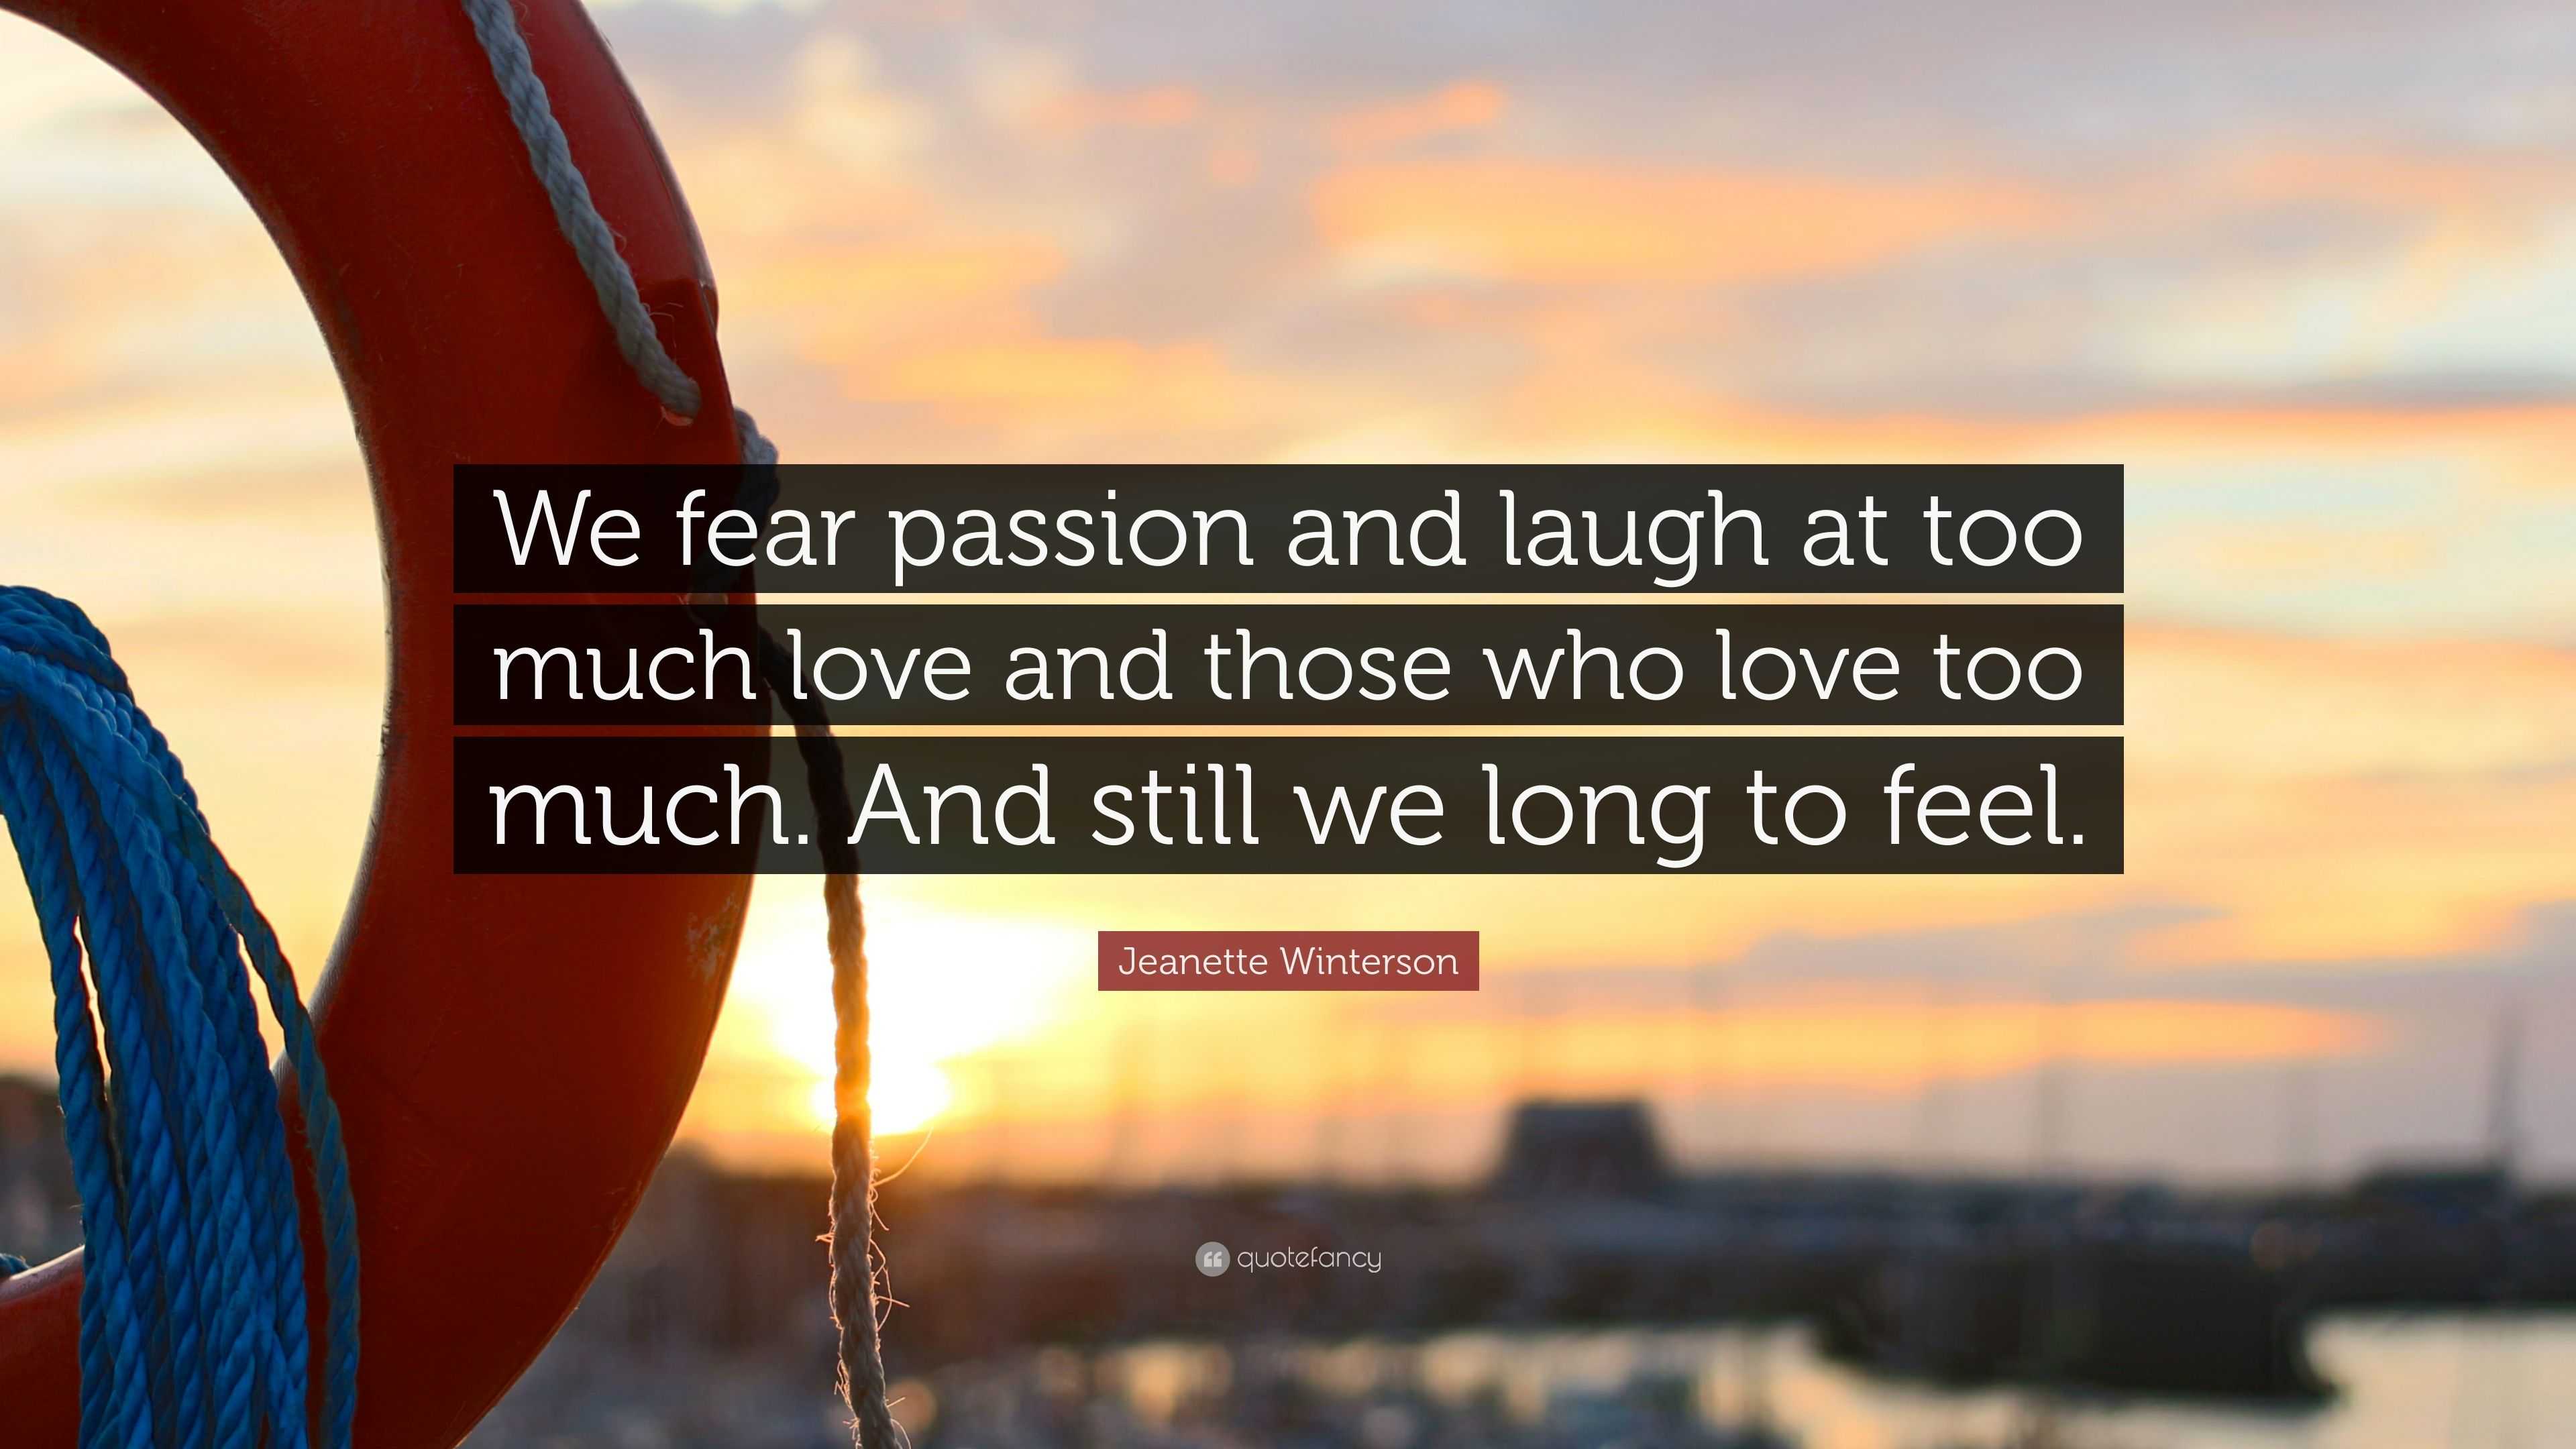 Jeanette Winterson Quote We Fear Passion And Laugh At Too Much Love And Those Who Love Too